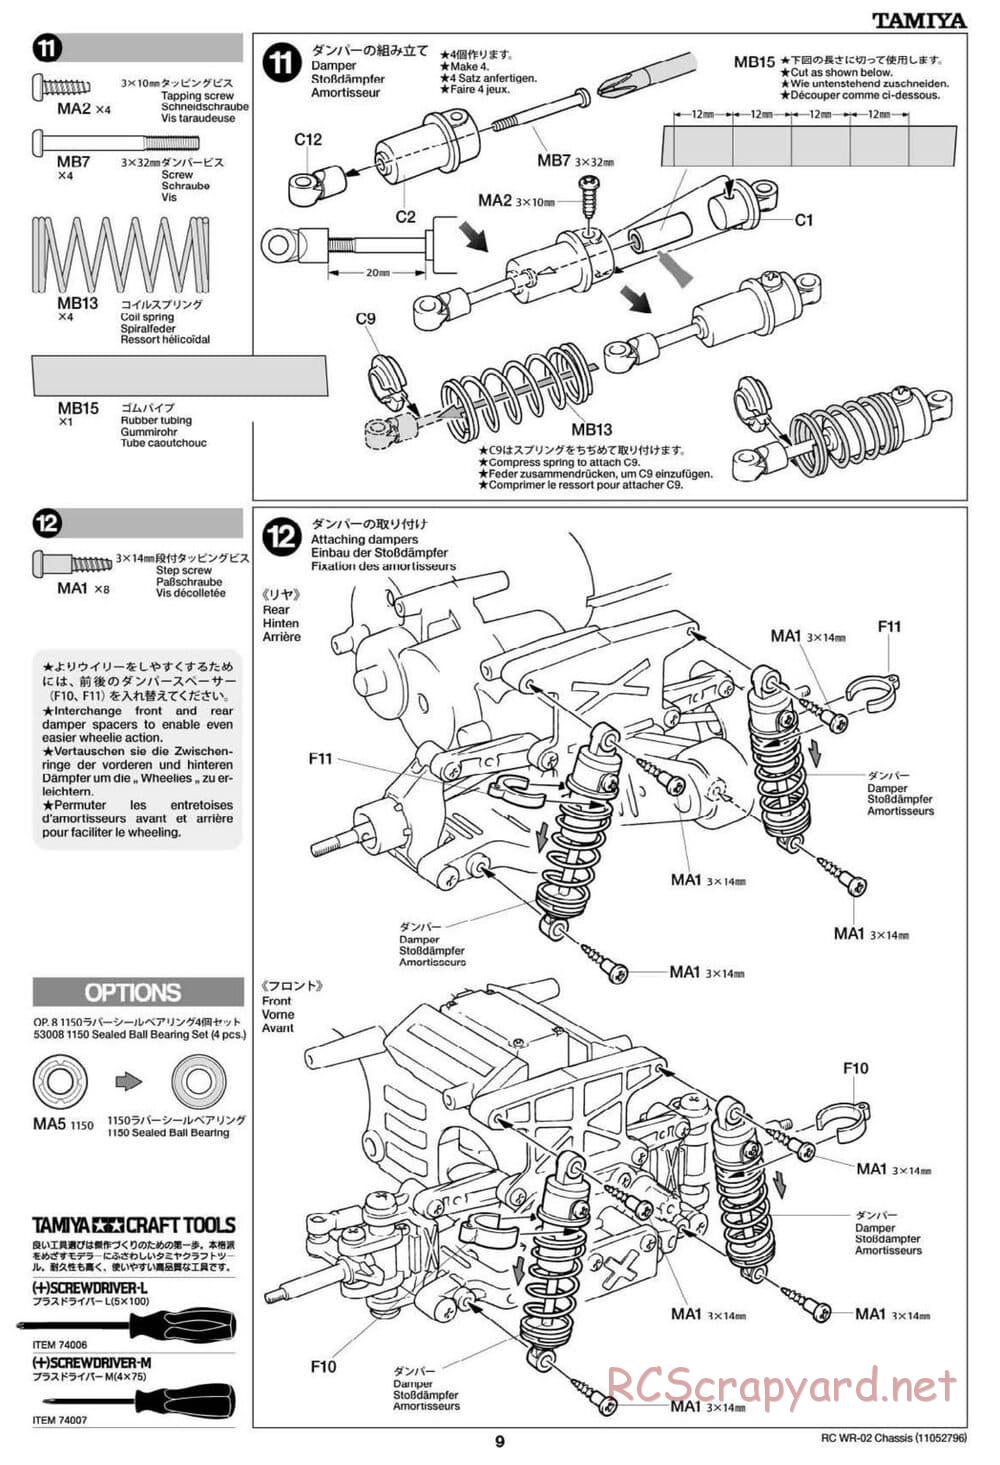 Tamiya - VW Type 2 Wheelie (T1) - WR-02 Chassis - Manual - Page 9